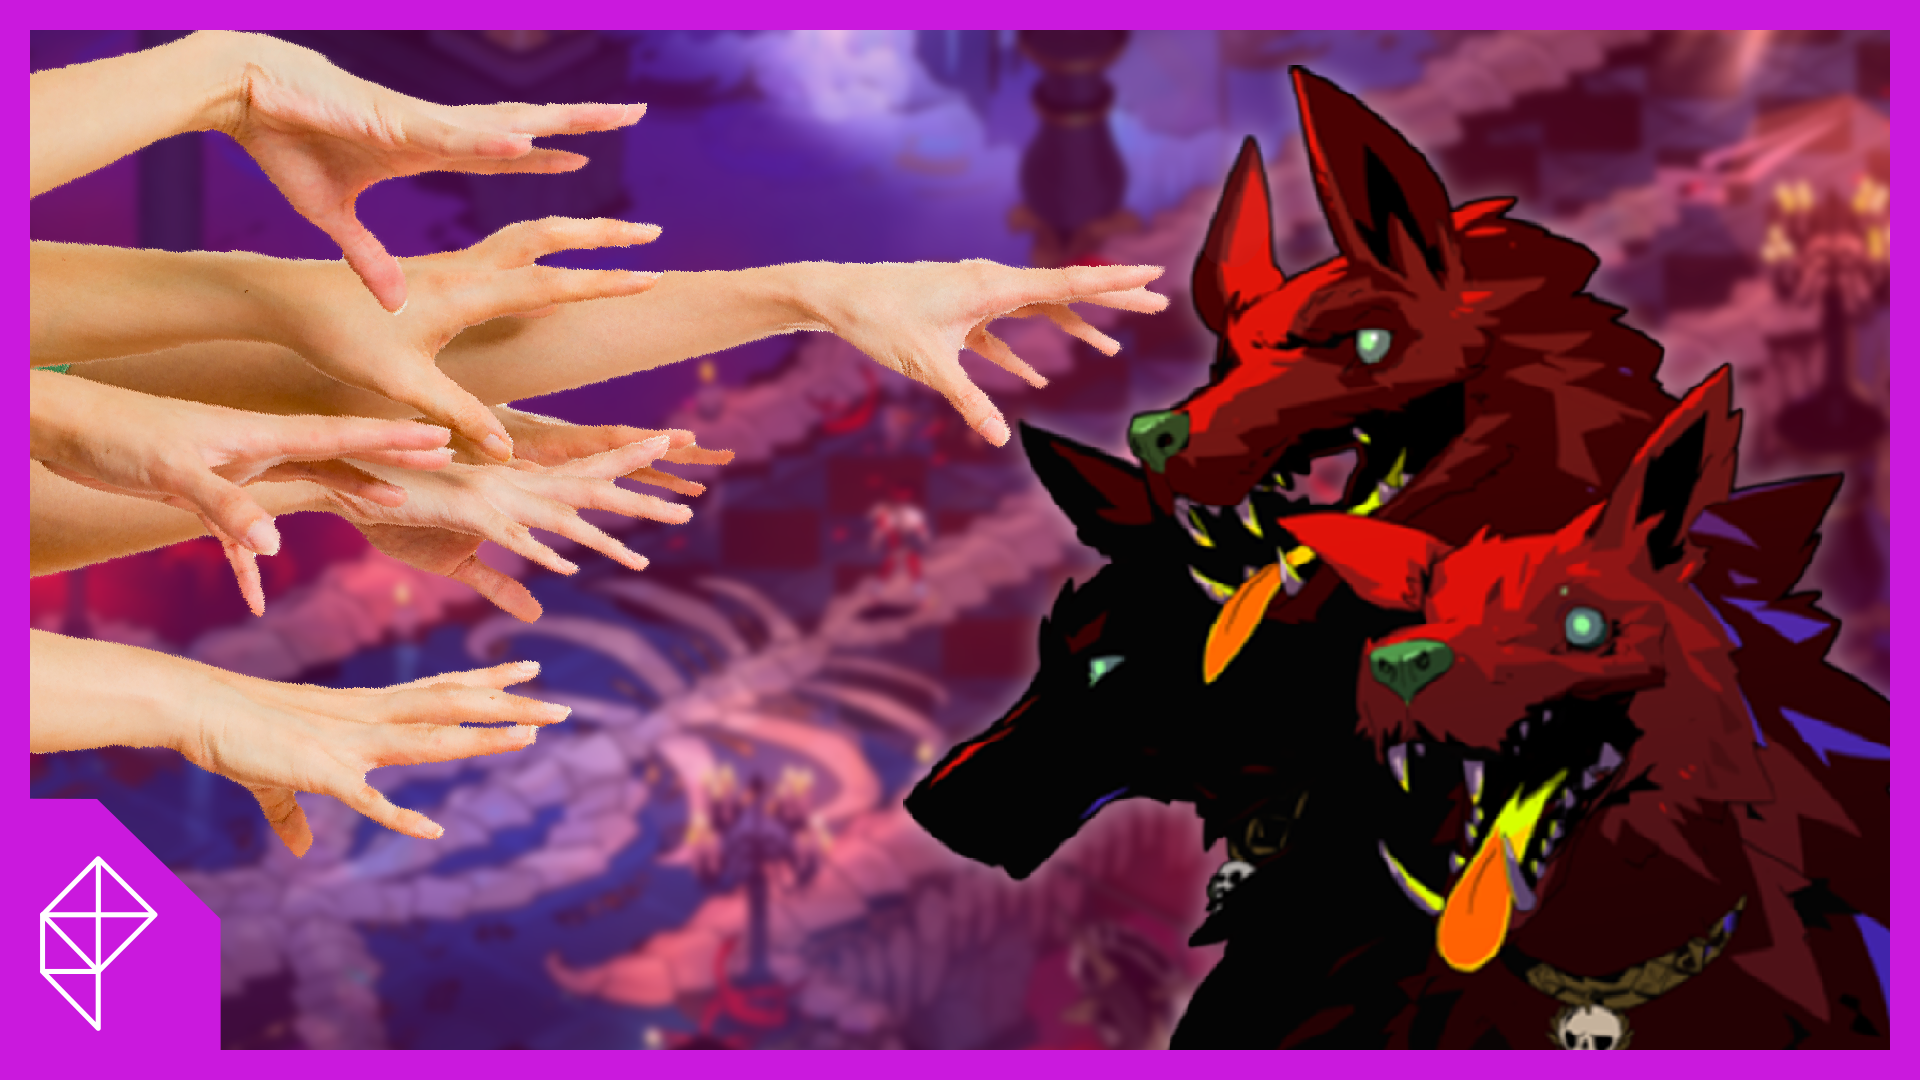 A cluster of hands reaching out to pet Cerberus, from the game Hades